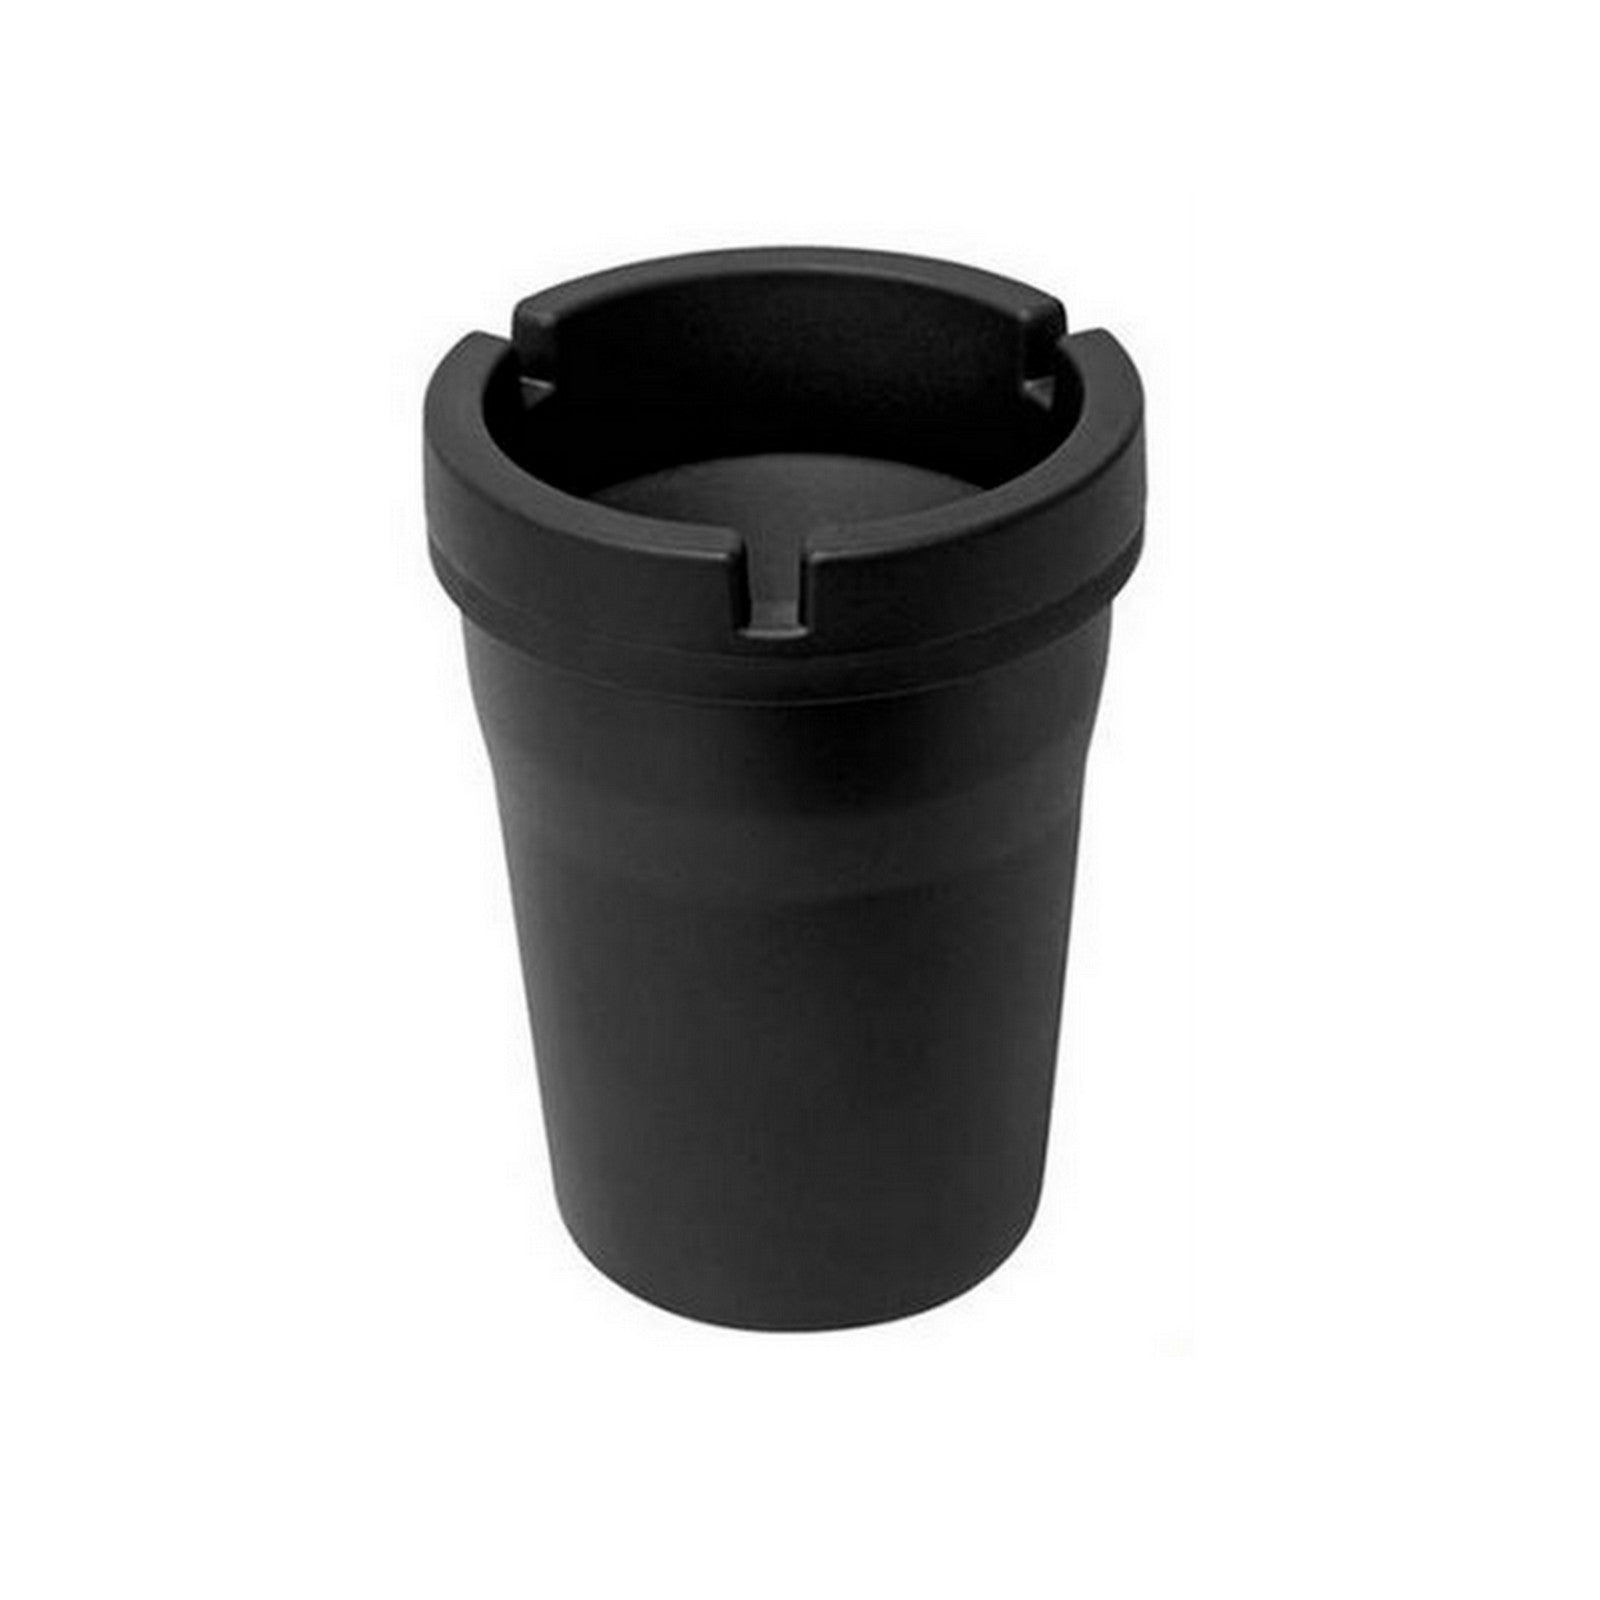 PORTABLE ASH TRAY CONTAINER FOR INDOOR USE